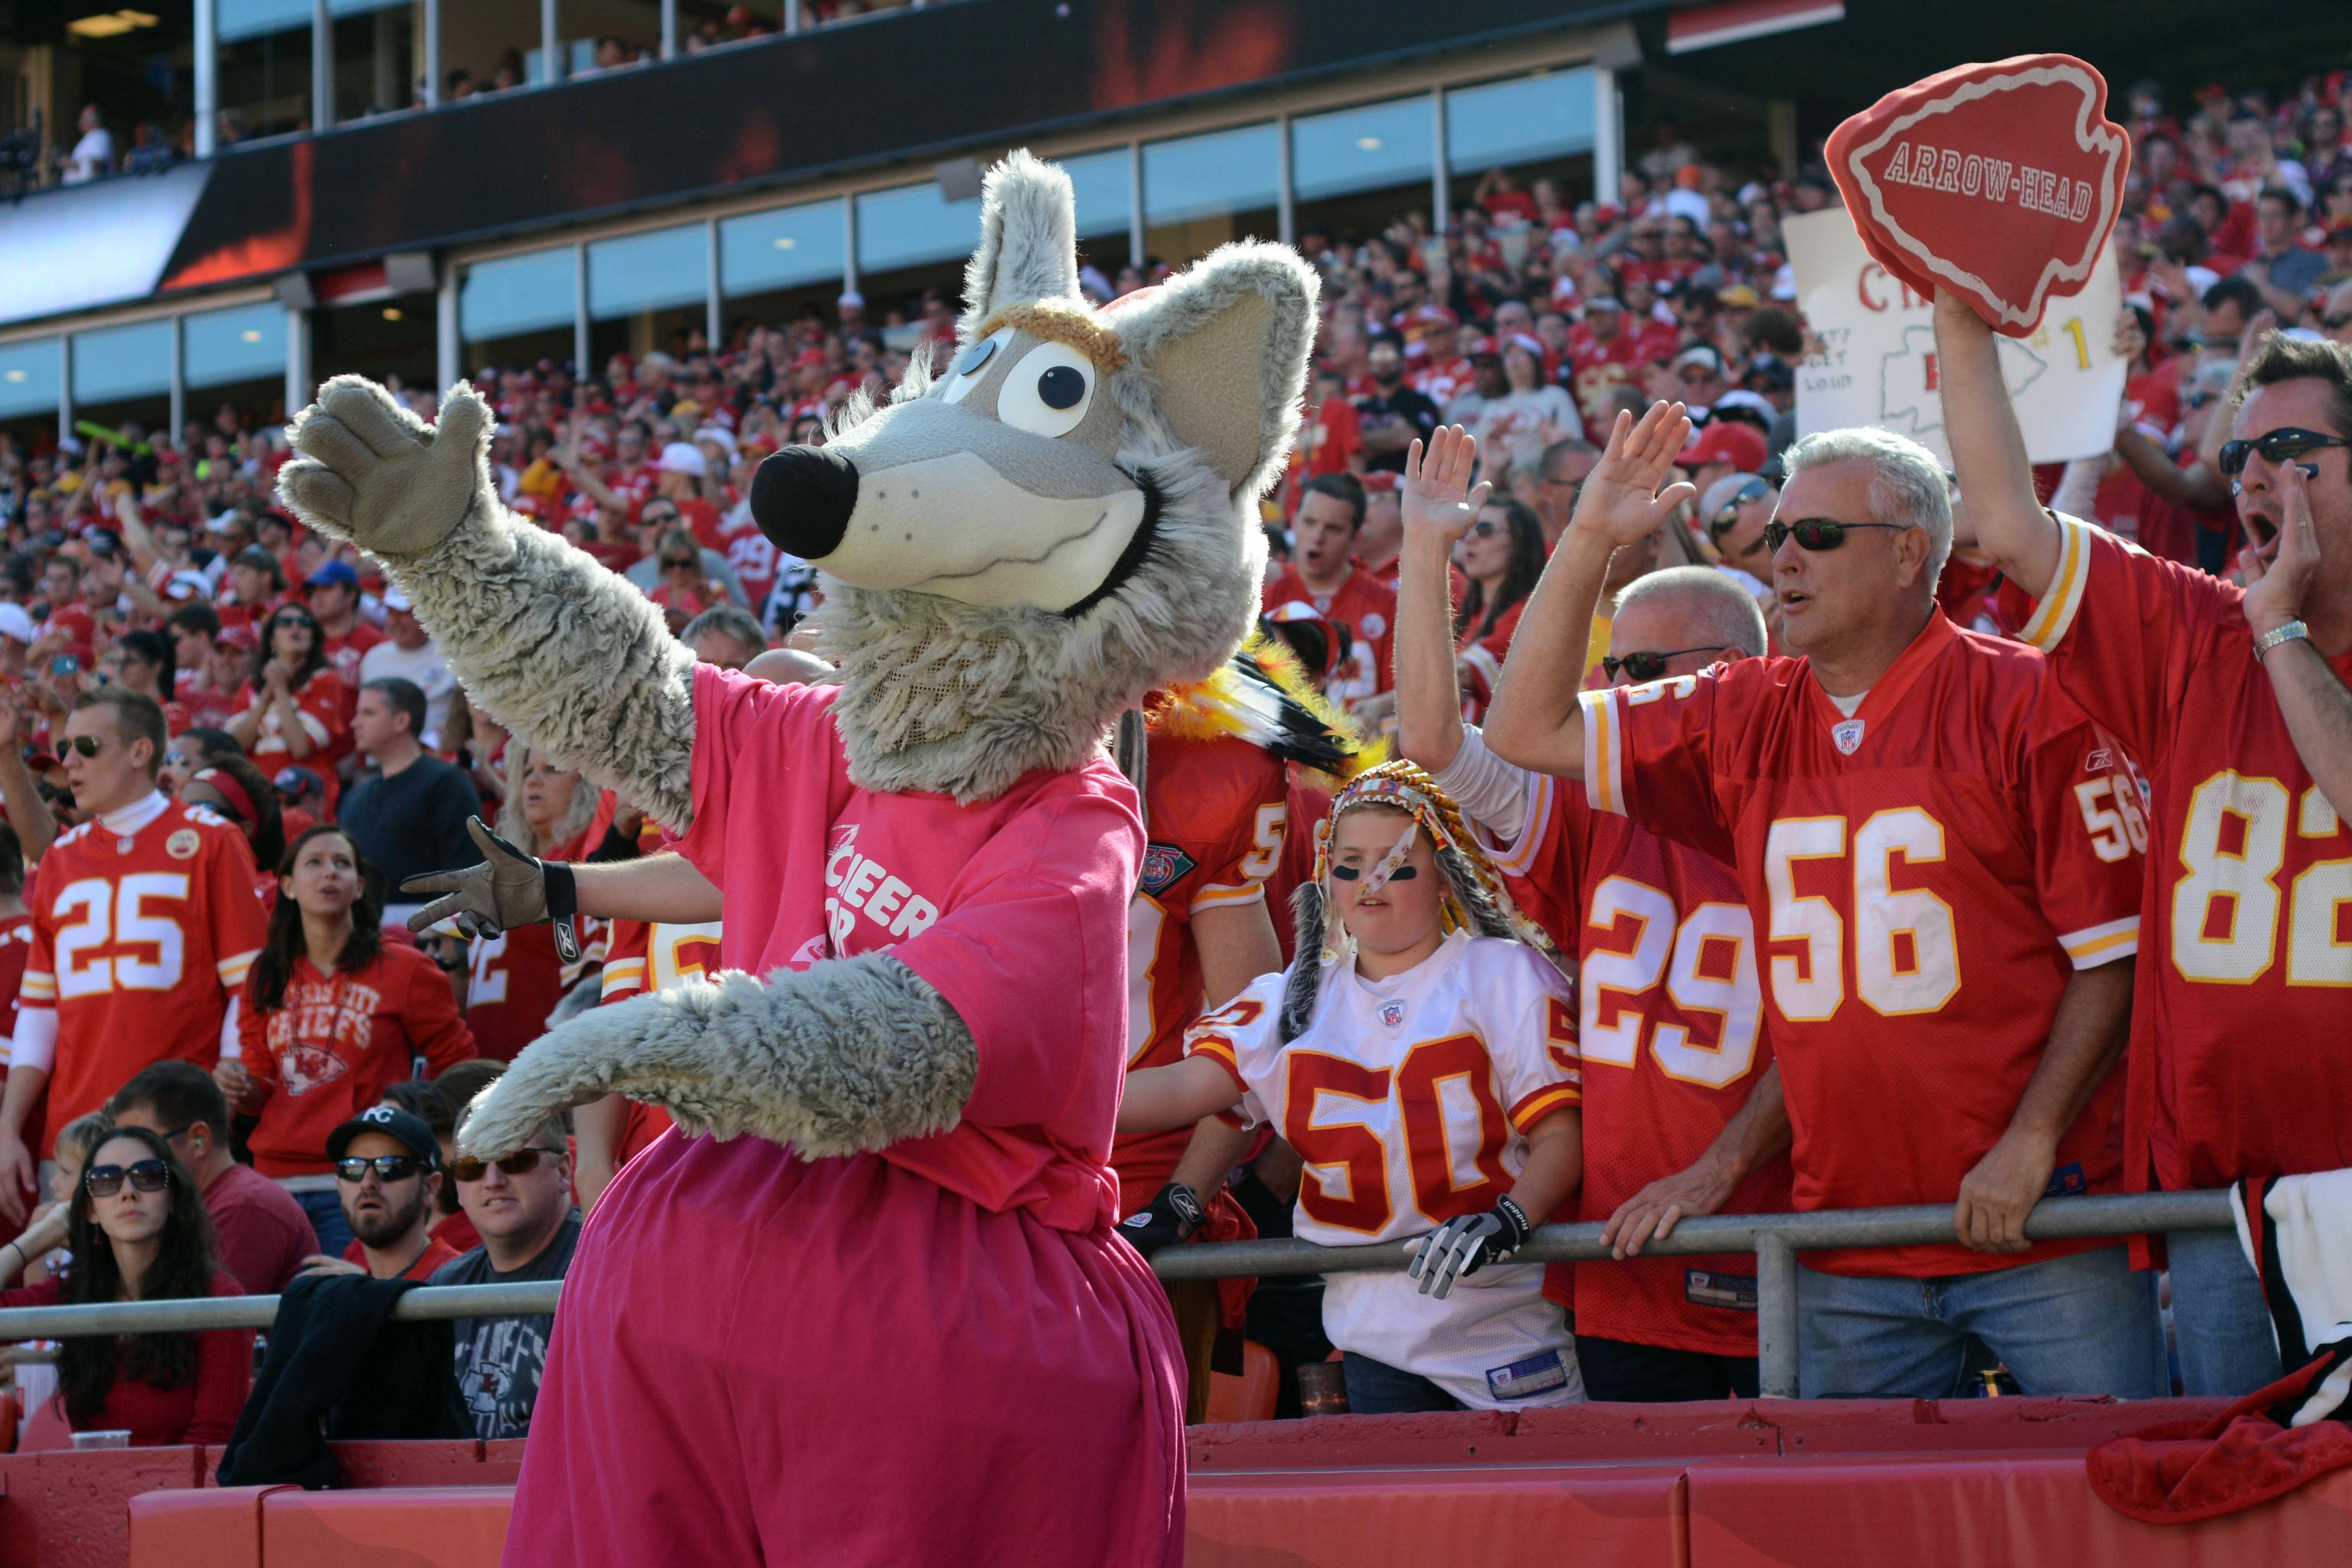 The KC Chiefs: Why I Have to Watch with My Head Turned